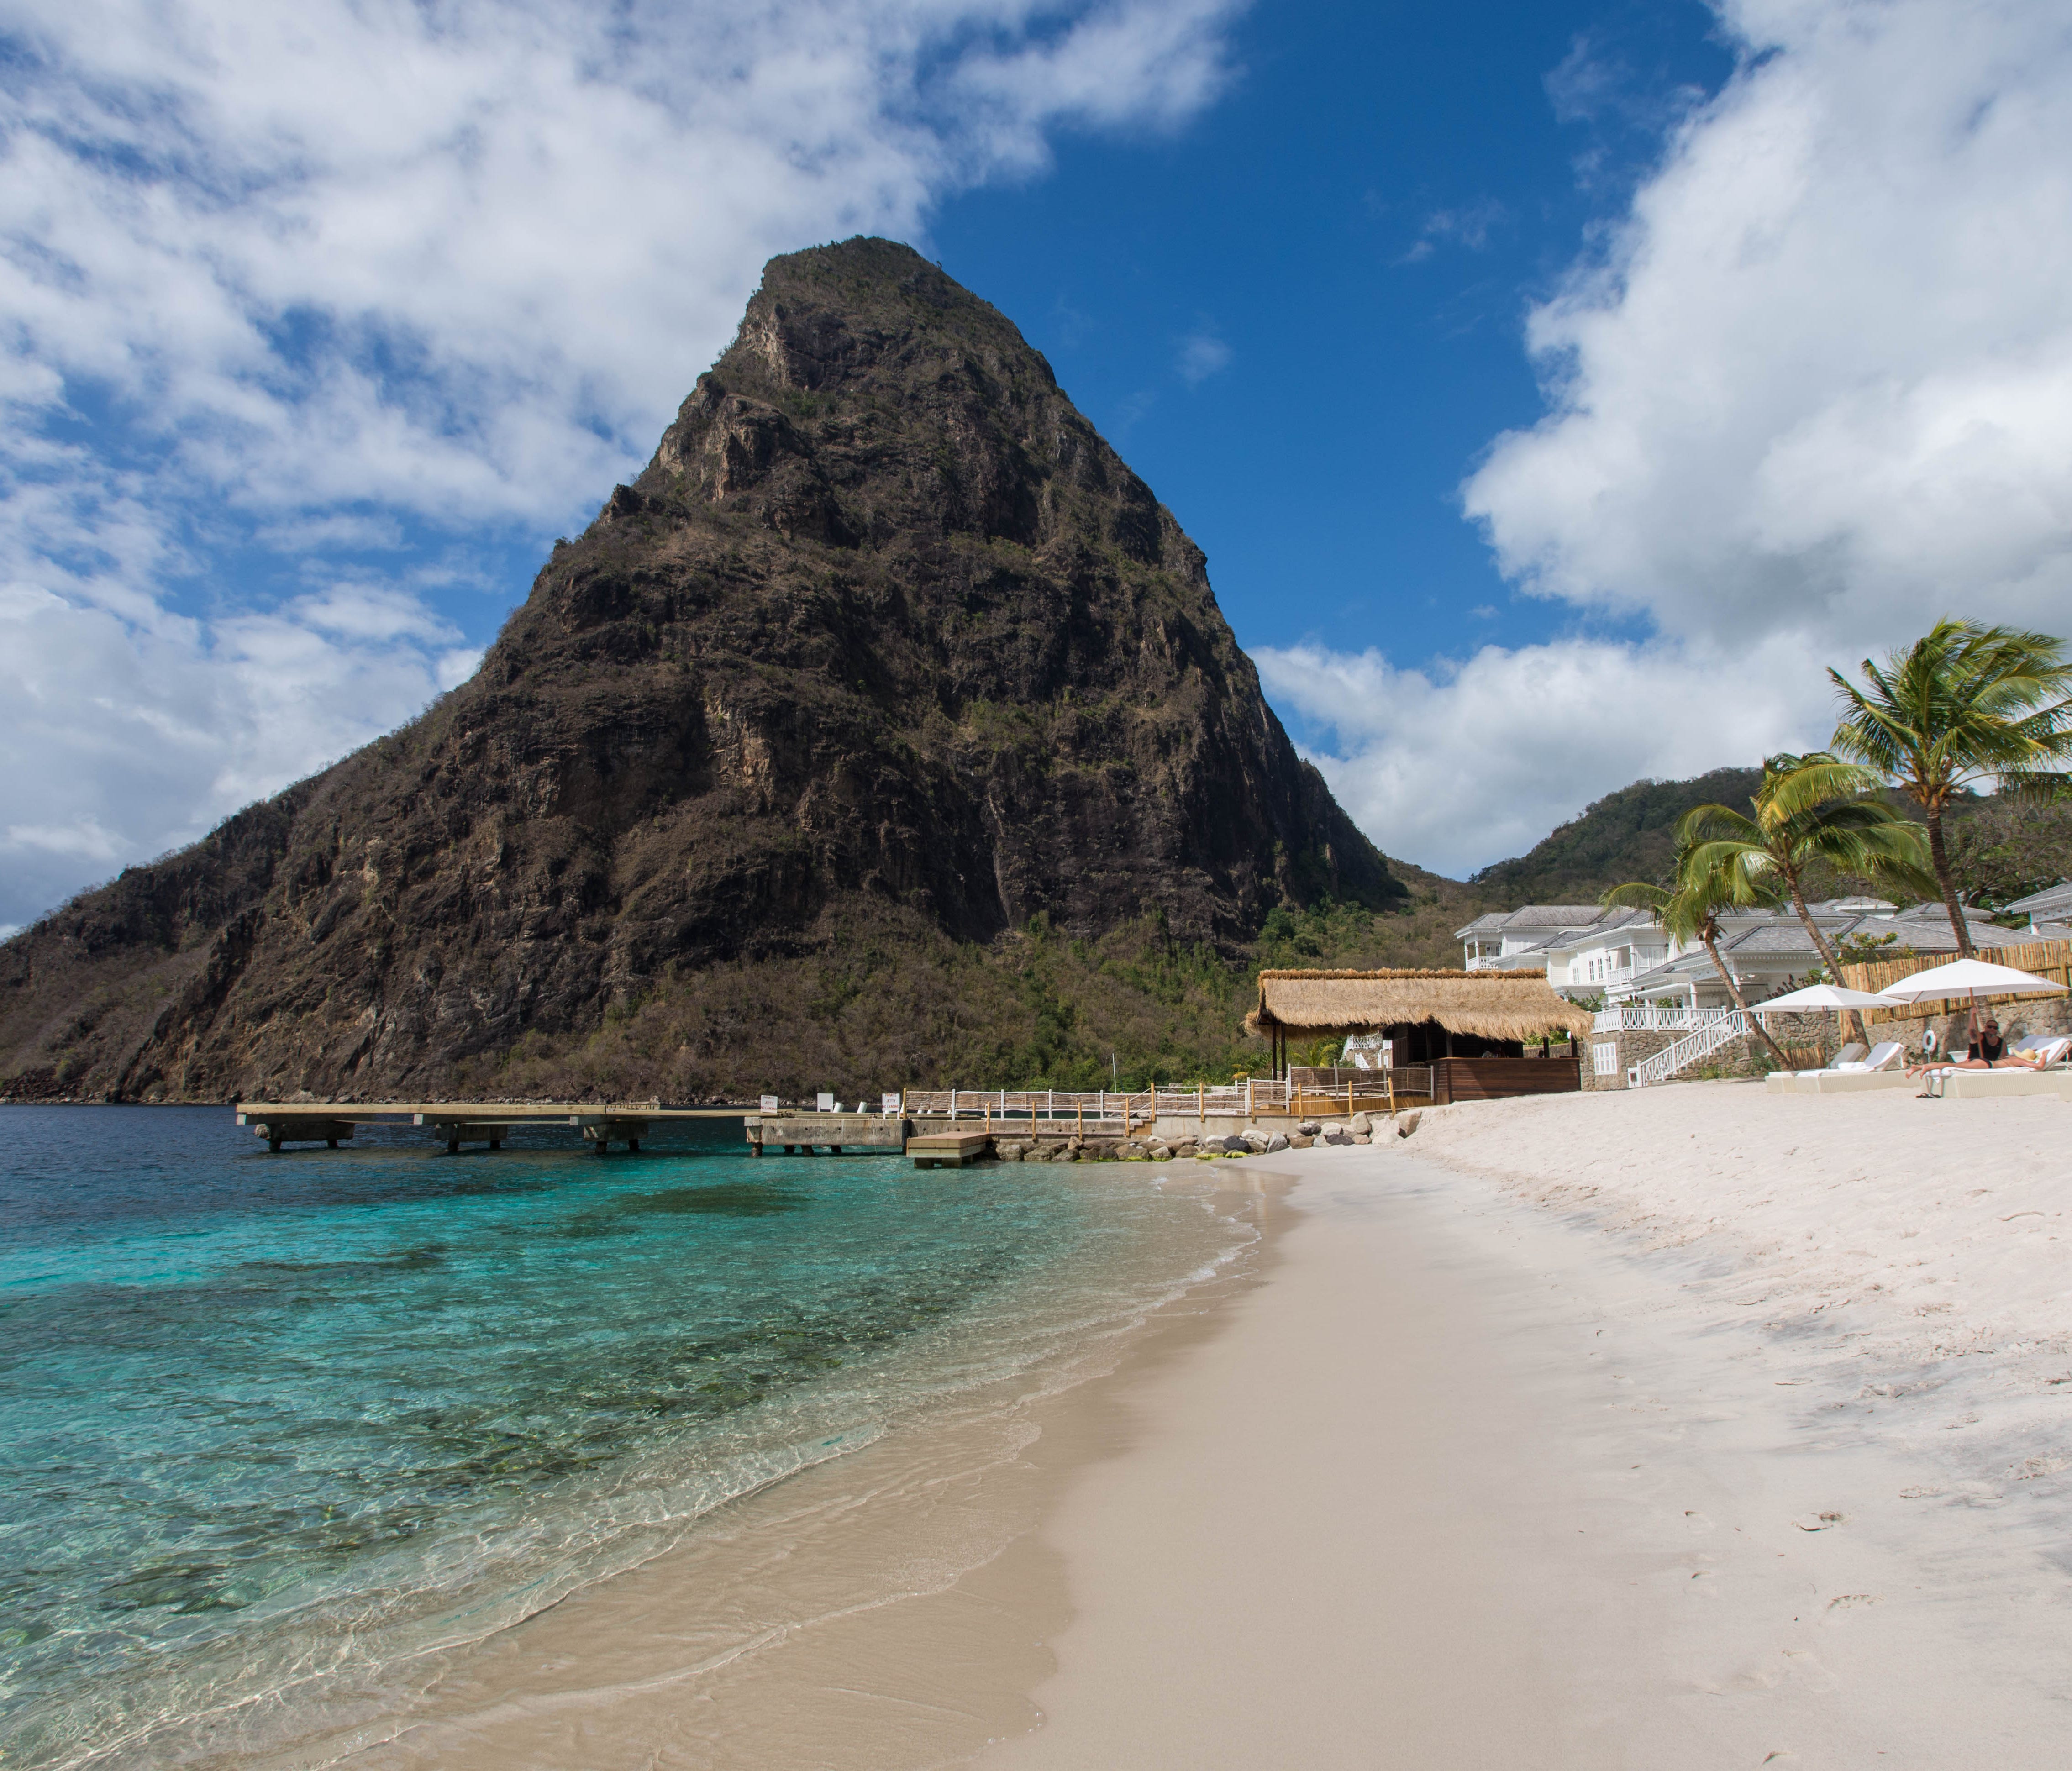 Sugar Beach, A Viceroy Resort, Soufriere, St. Lucia: Wedged between St. Lucia's iconic Pitons, Sugar Beach is one of the island's prettiest places to recharge. The setting and beach make this a true all-inclusive escape on resort-heavy St. Lucia, and